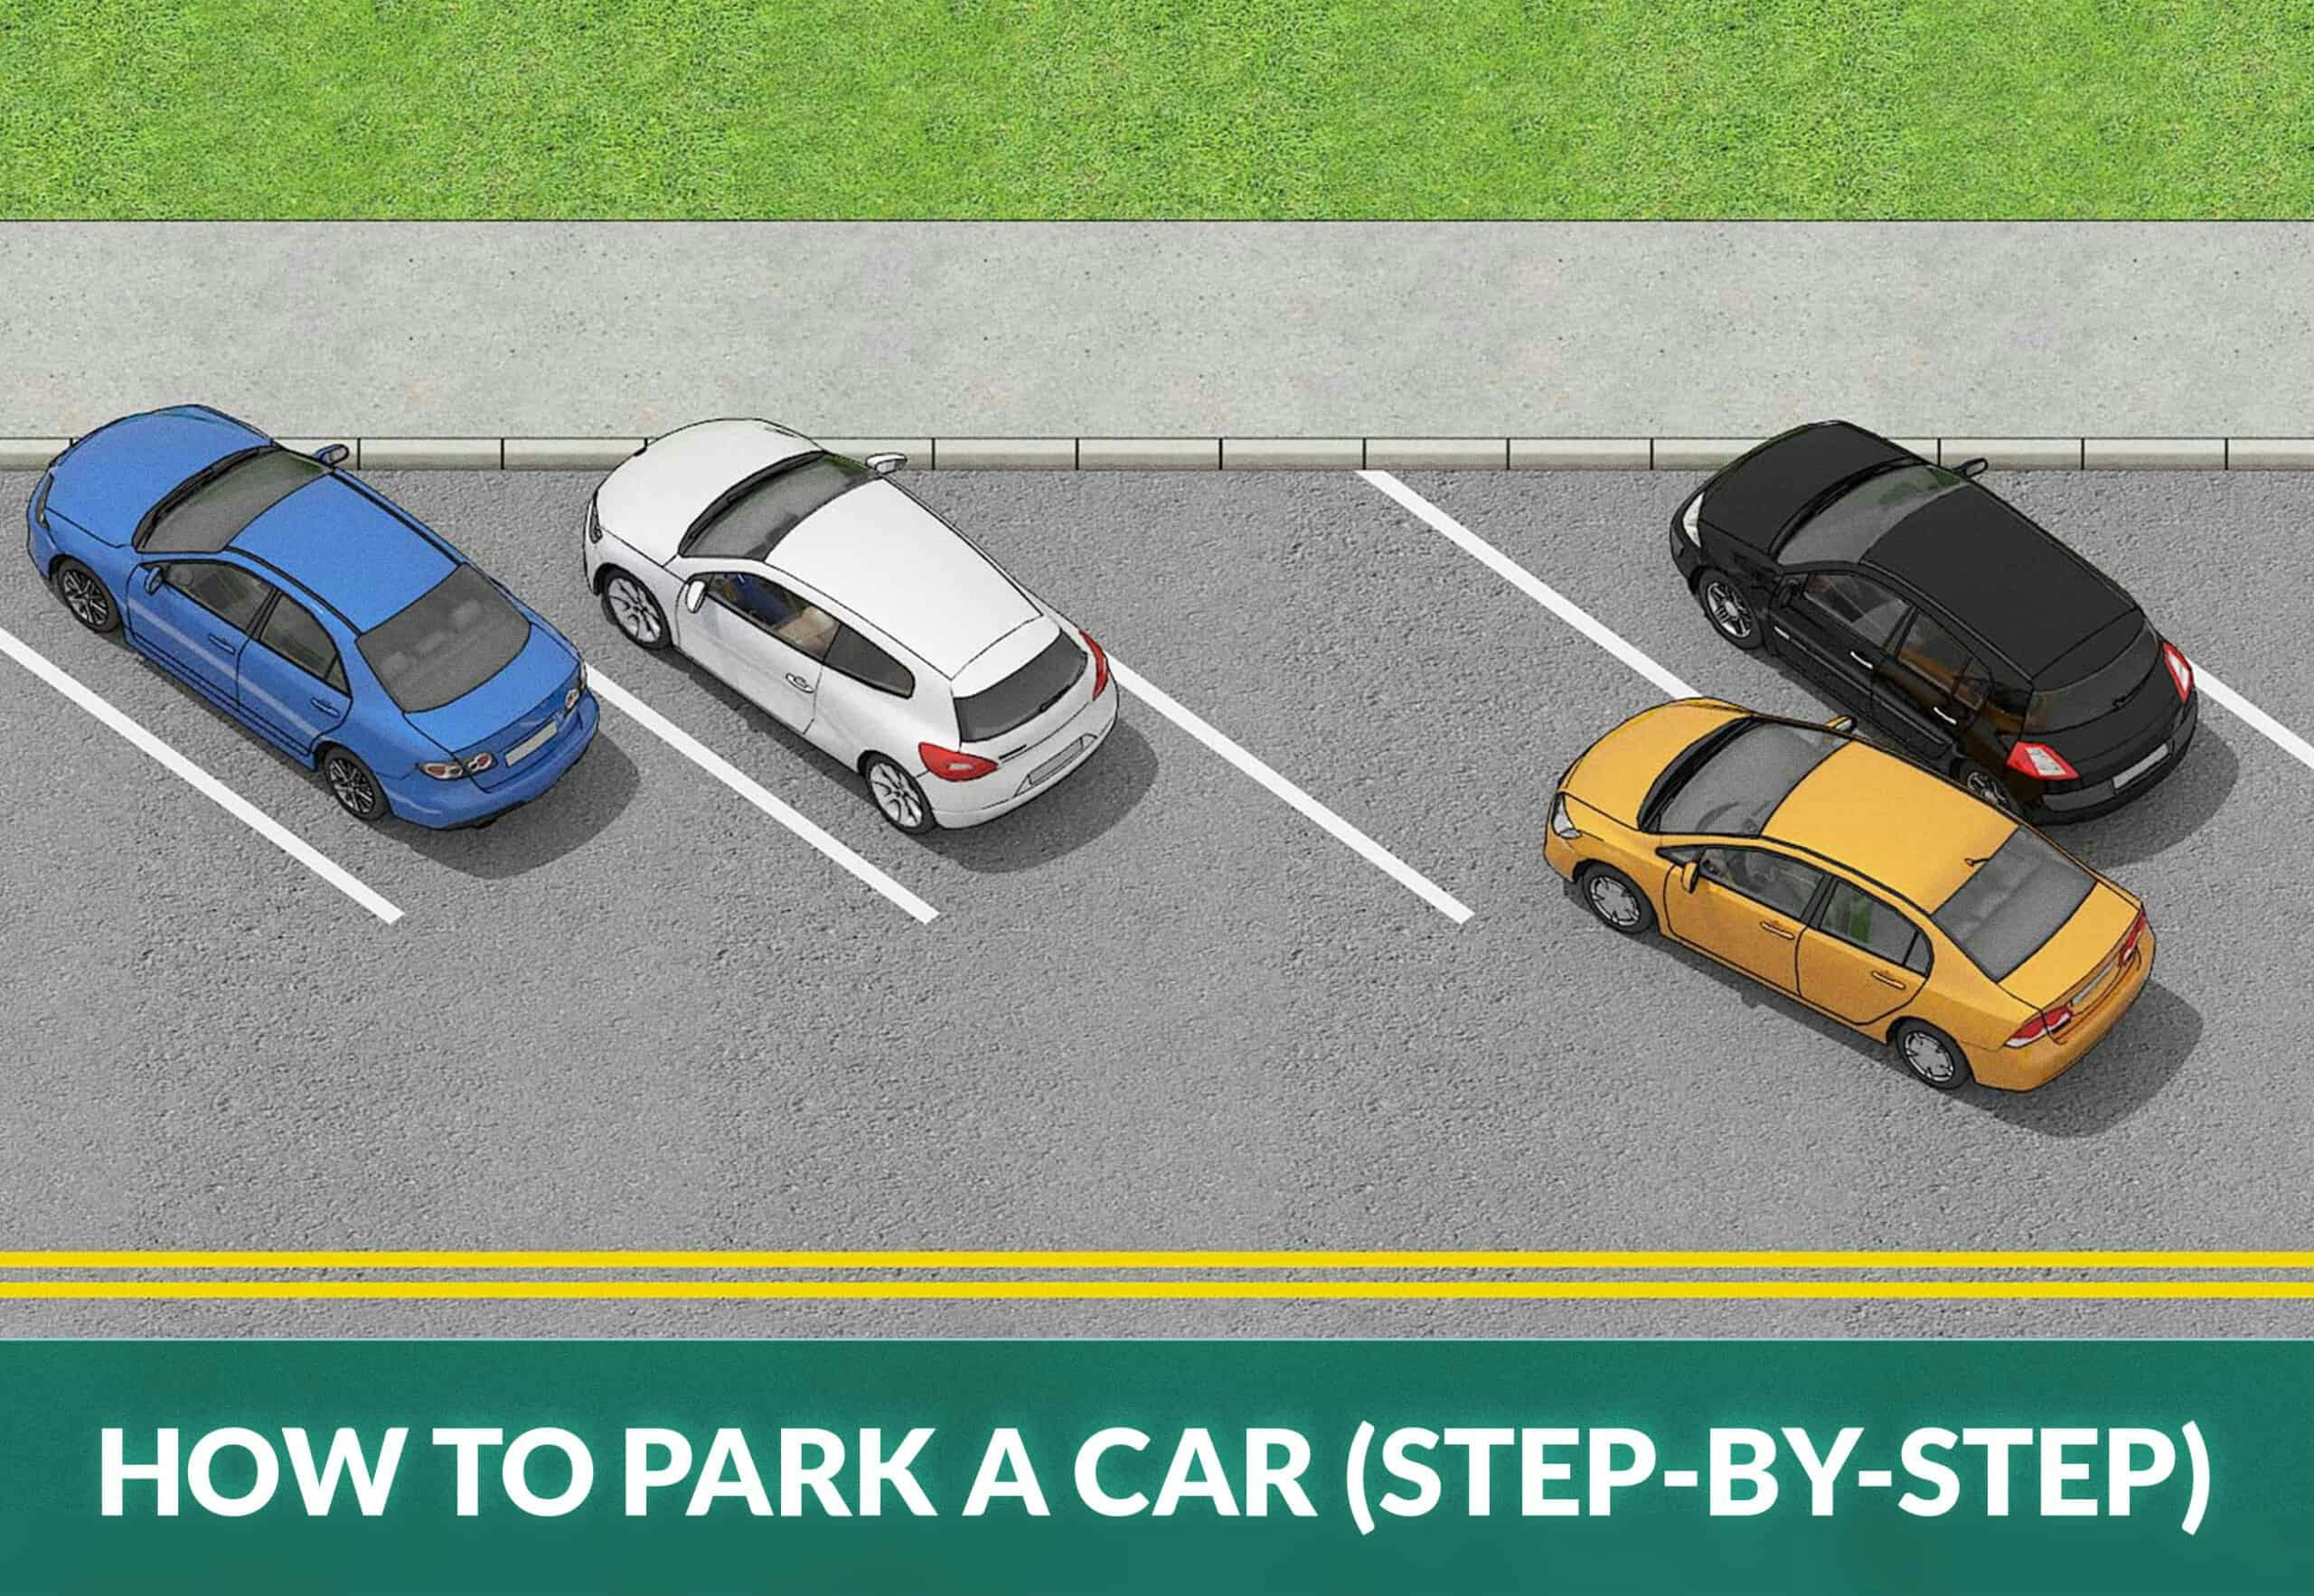 HOW TO PARK A CAR (STEP-BY-STEP)